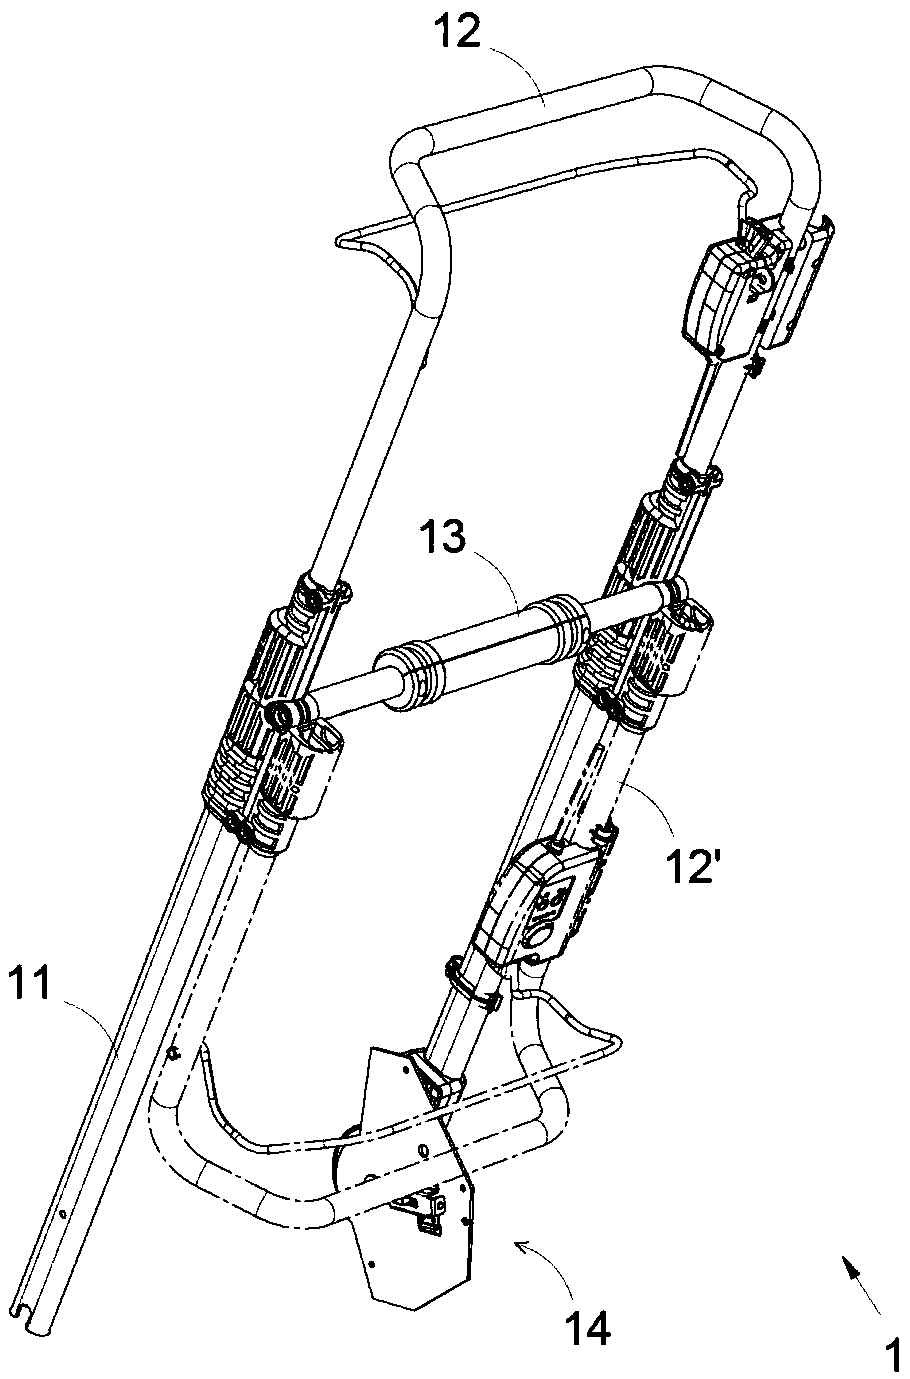 Electric lawn mower with functions of adjusting height and secondarily folding